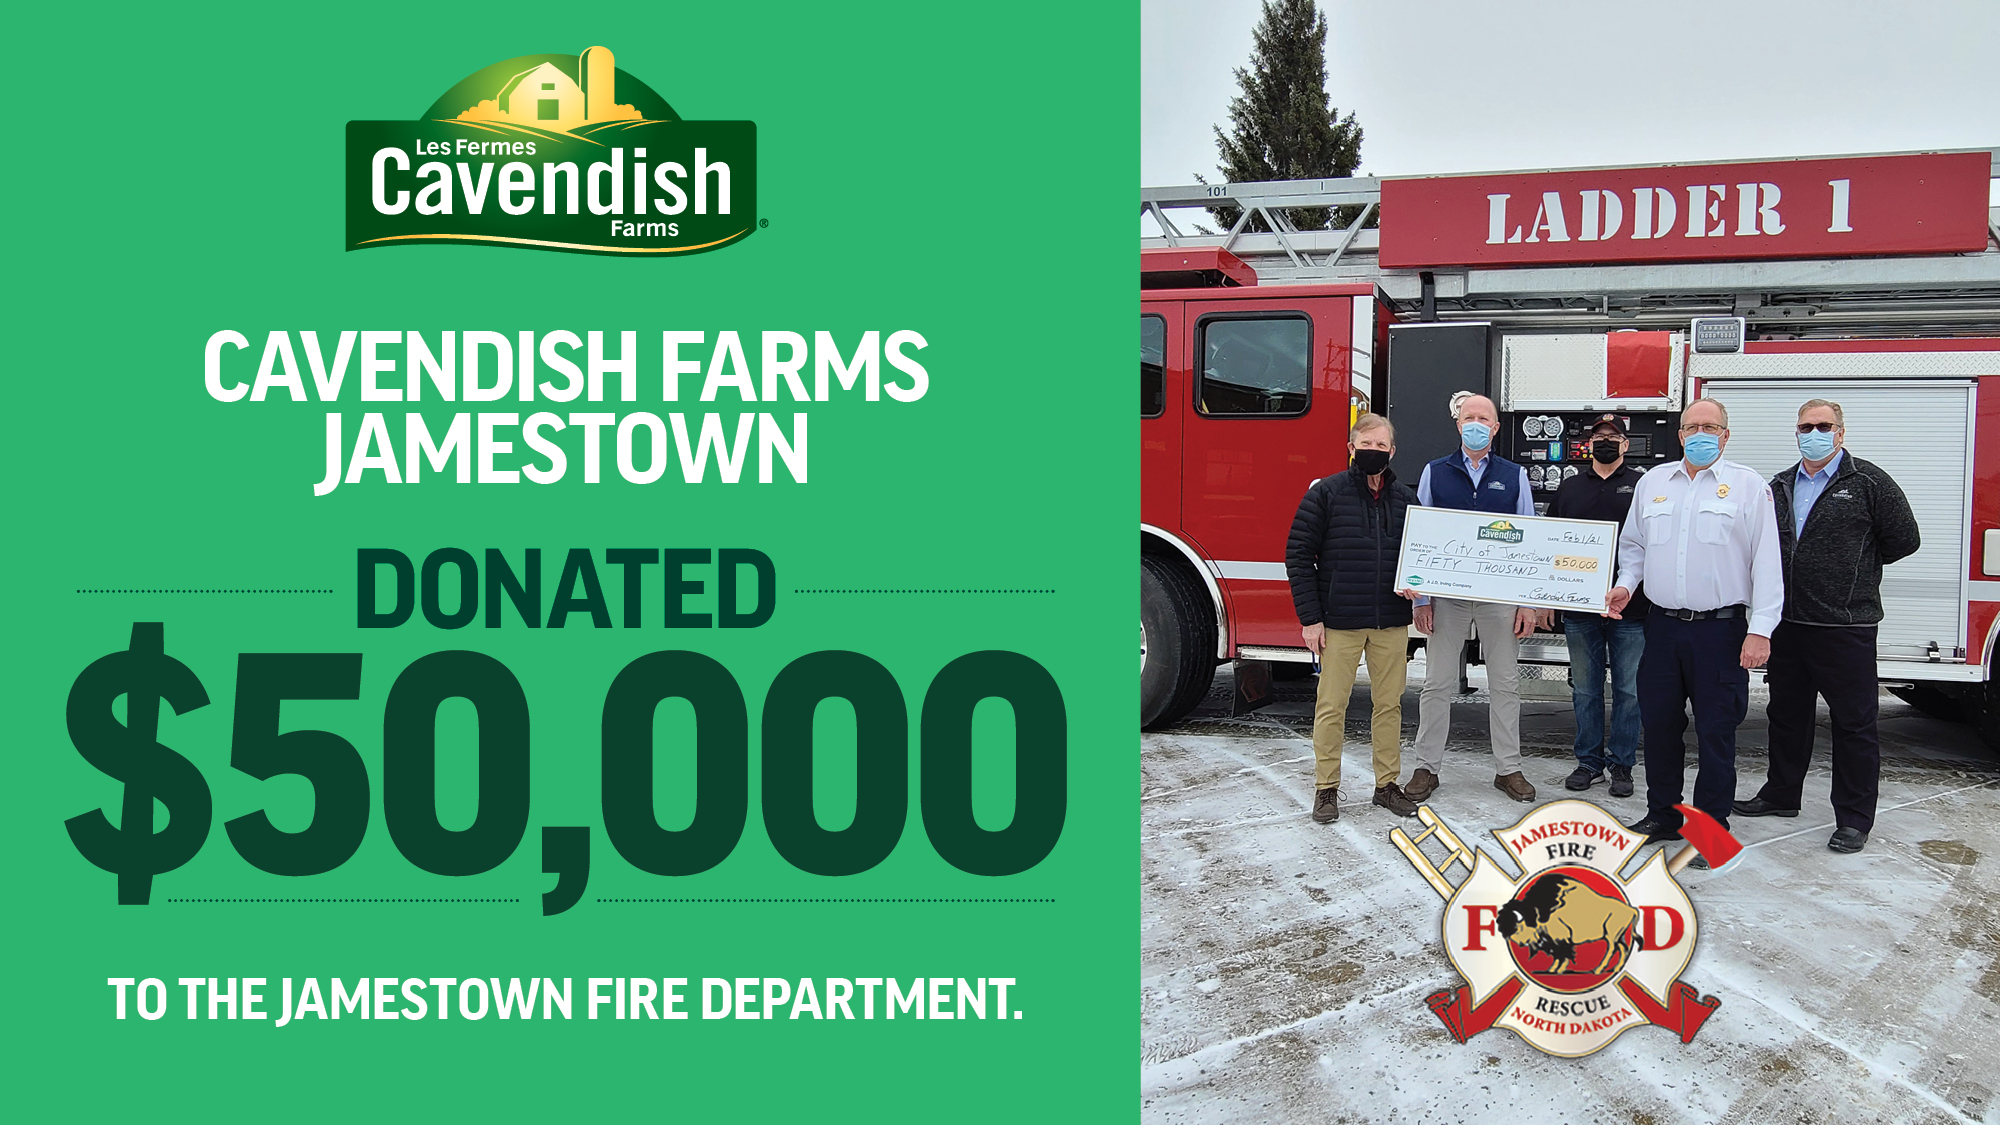 Cavendish Farms Supports the Jamestown Fire Department $50,000 donated to help offset some of the cost of a new ladder truck